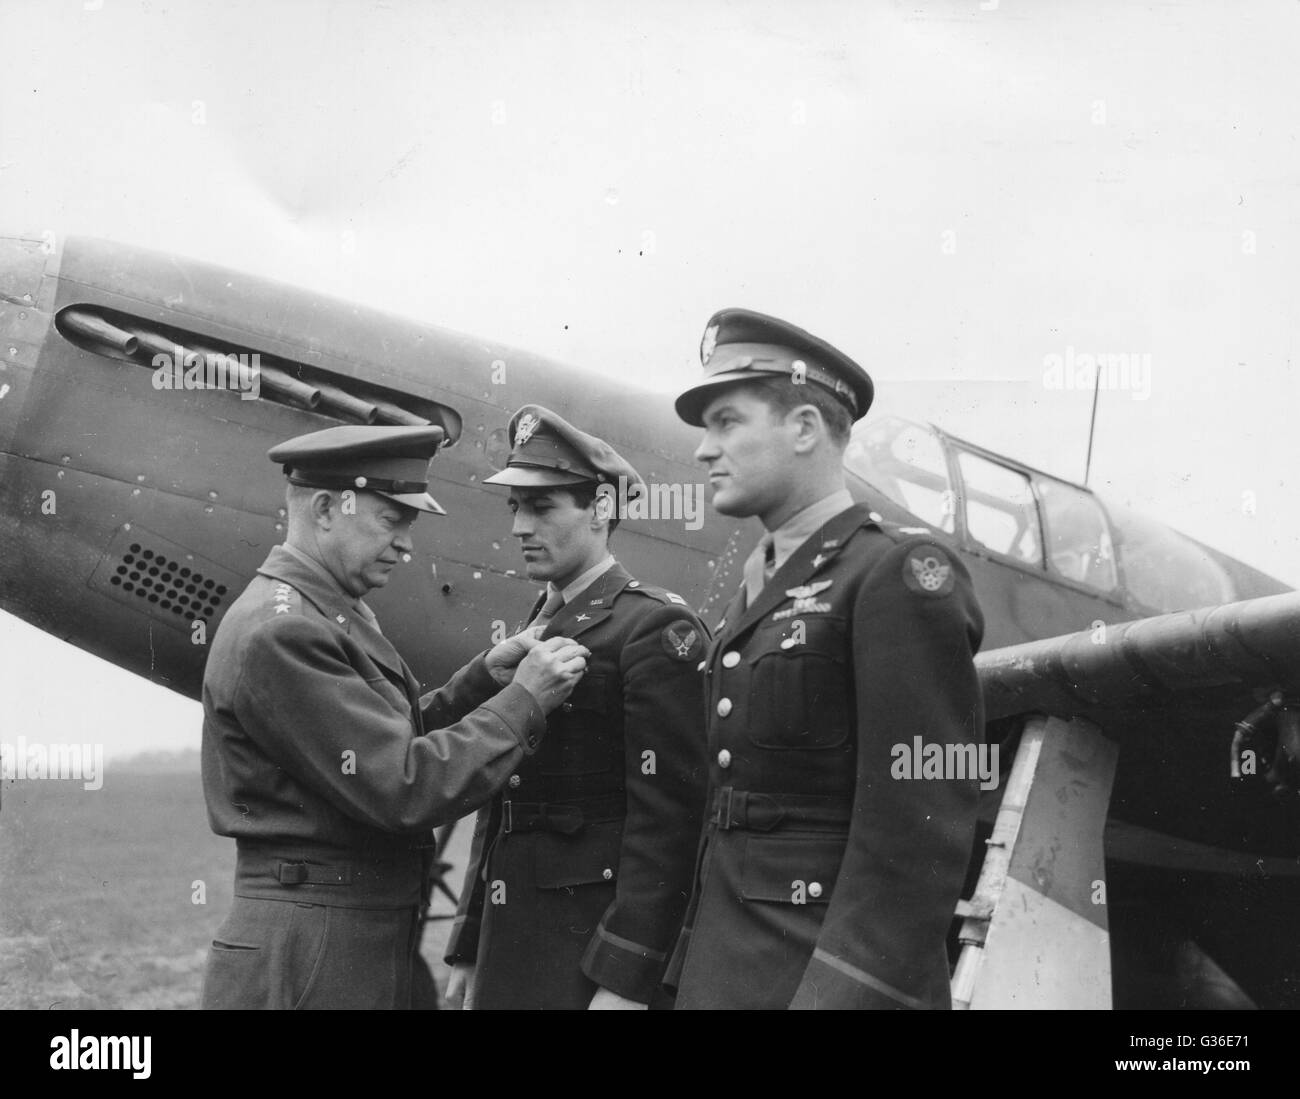 General Dwight D. Eisenhower, Supreme Allied Commander, pins the Distinguished Service Cross to the blouse of Capt. Donald Gentile. On the right is Col Donald Blakeslee, who also received the DSO. Stock Photo